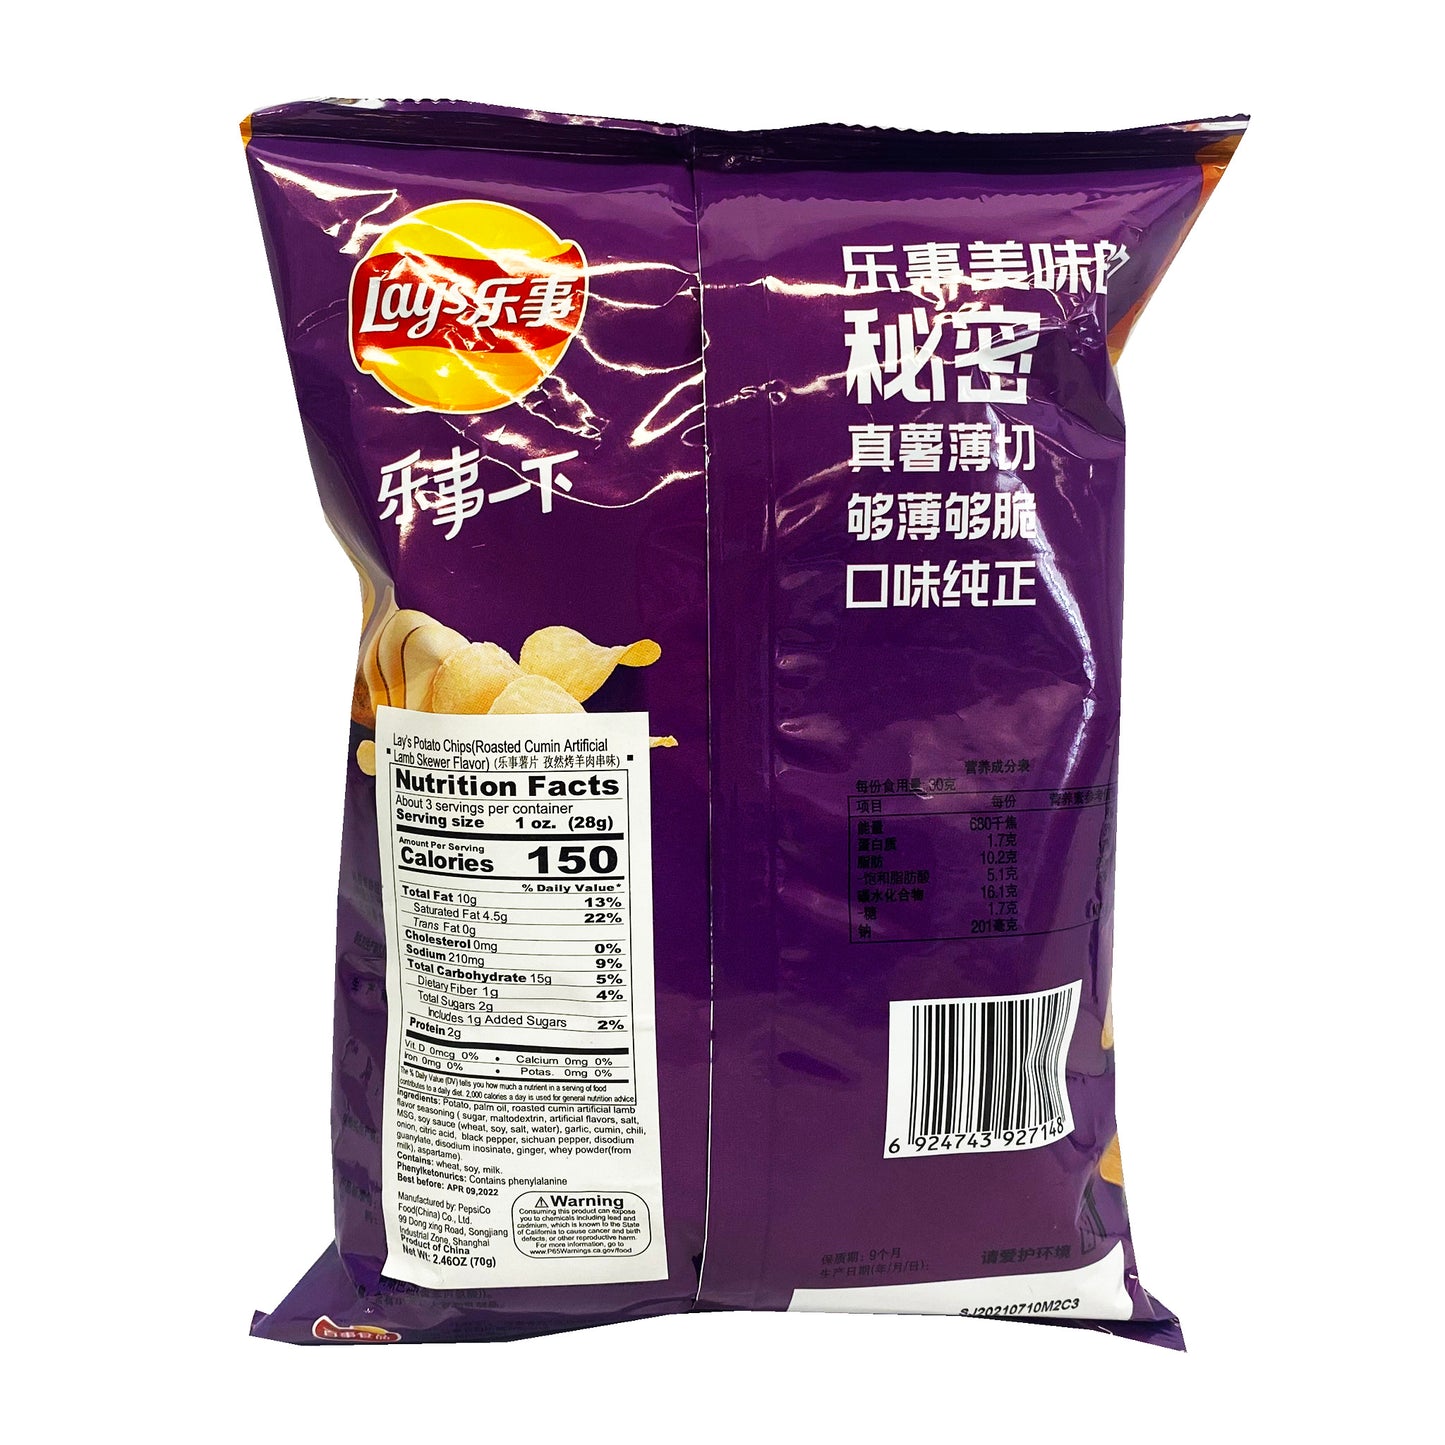 Back graphic image of Lay's Potato Chips - Roasted Cumin Lamb Skewer Flavor 2.46oz (70g) - 乐事薯片 -  孜然烤羊肉串味 2.46oz (70g)